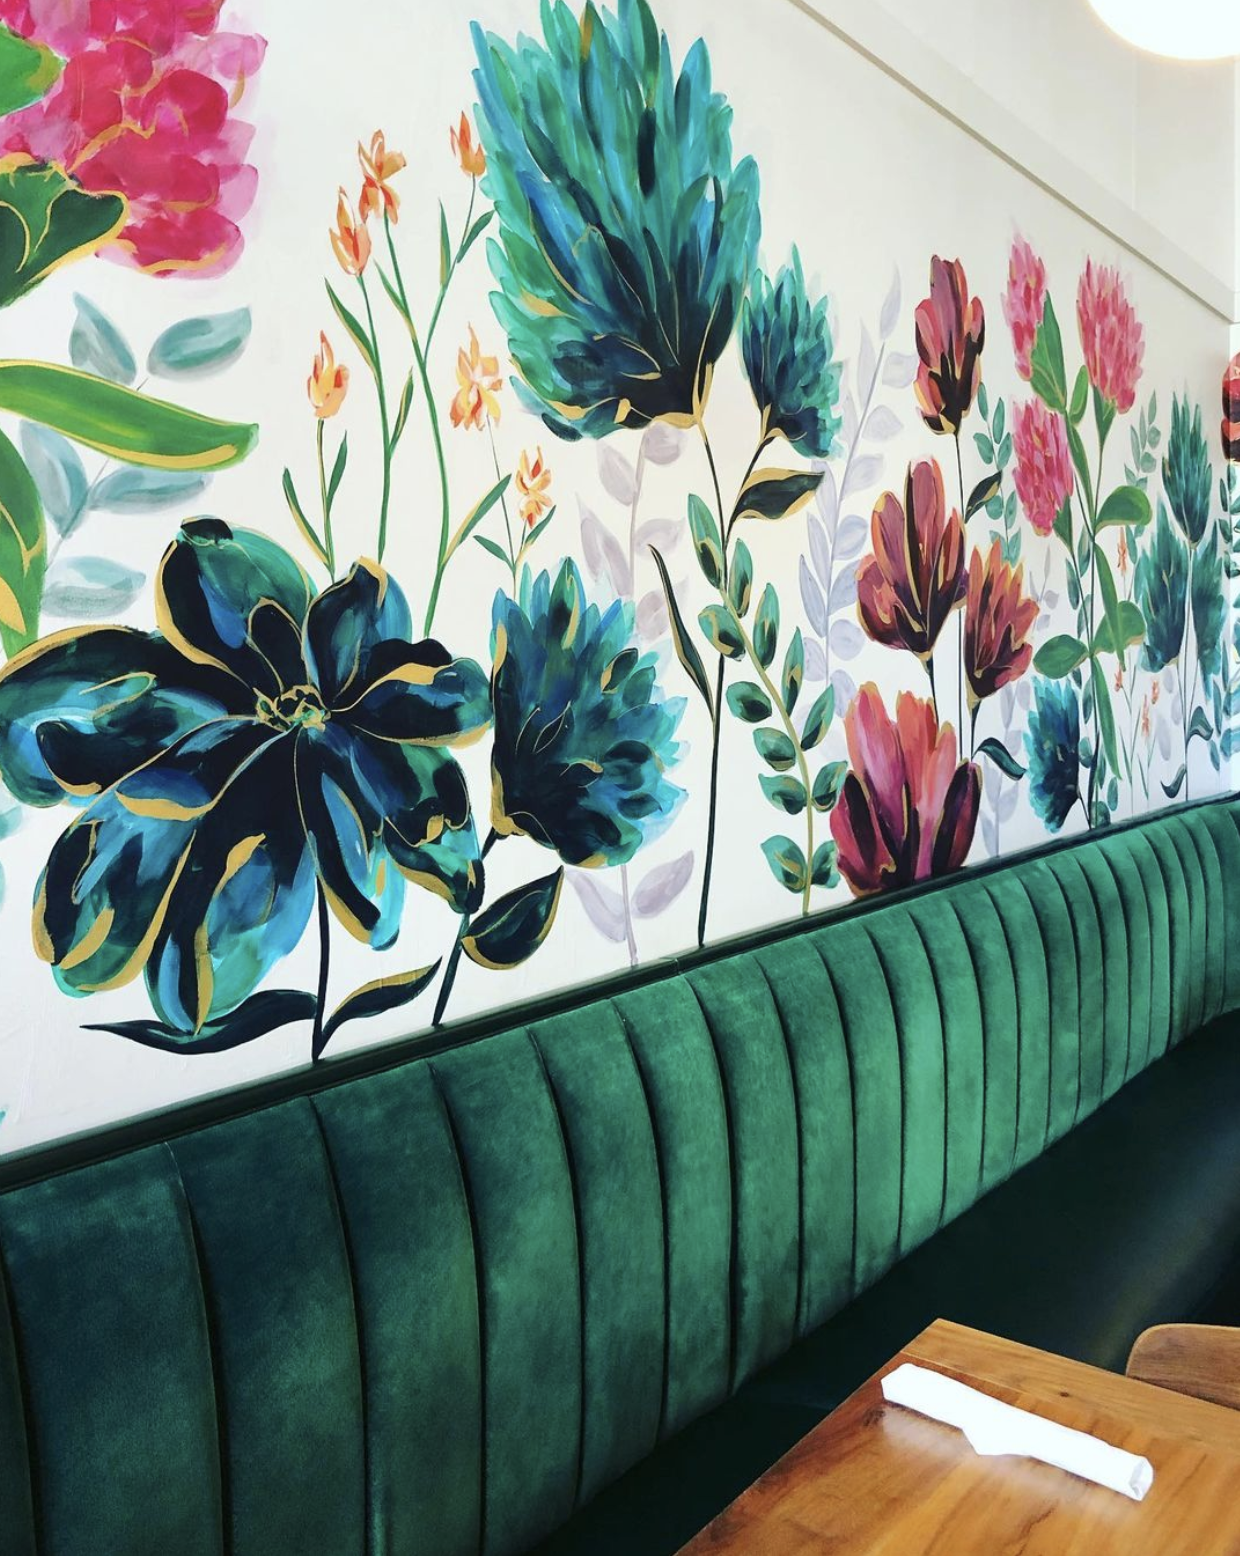 The Clover and The Bee, a St. Louis area eatery with green velvet booths and colorful floral murals on the walls